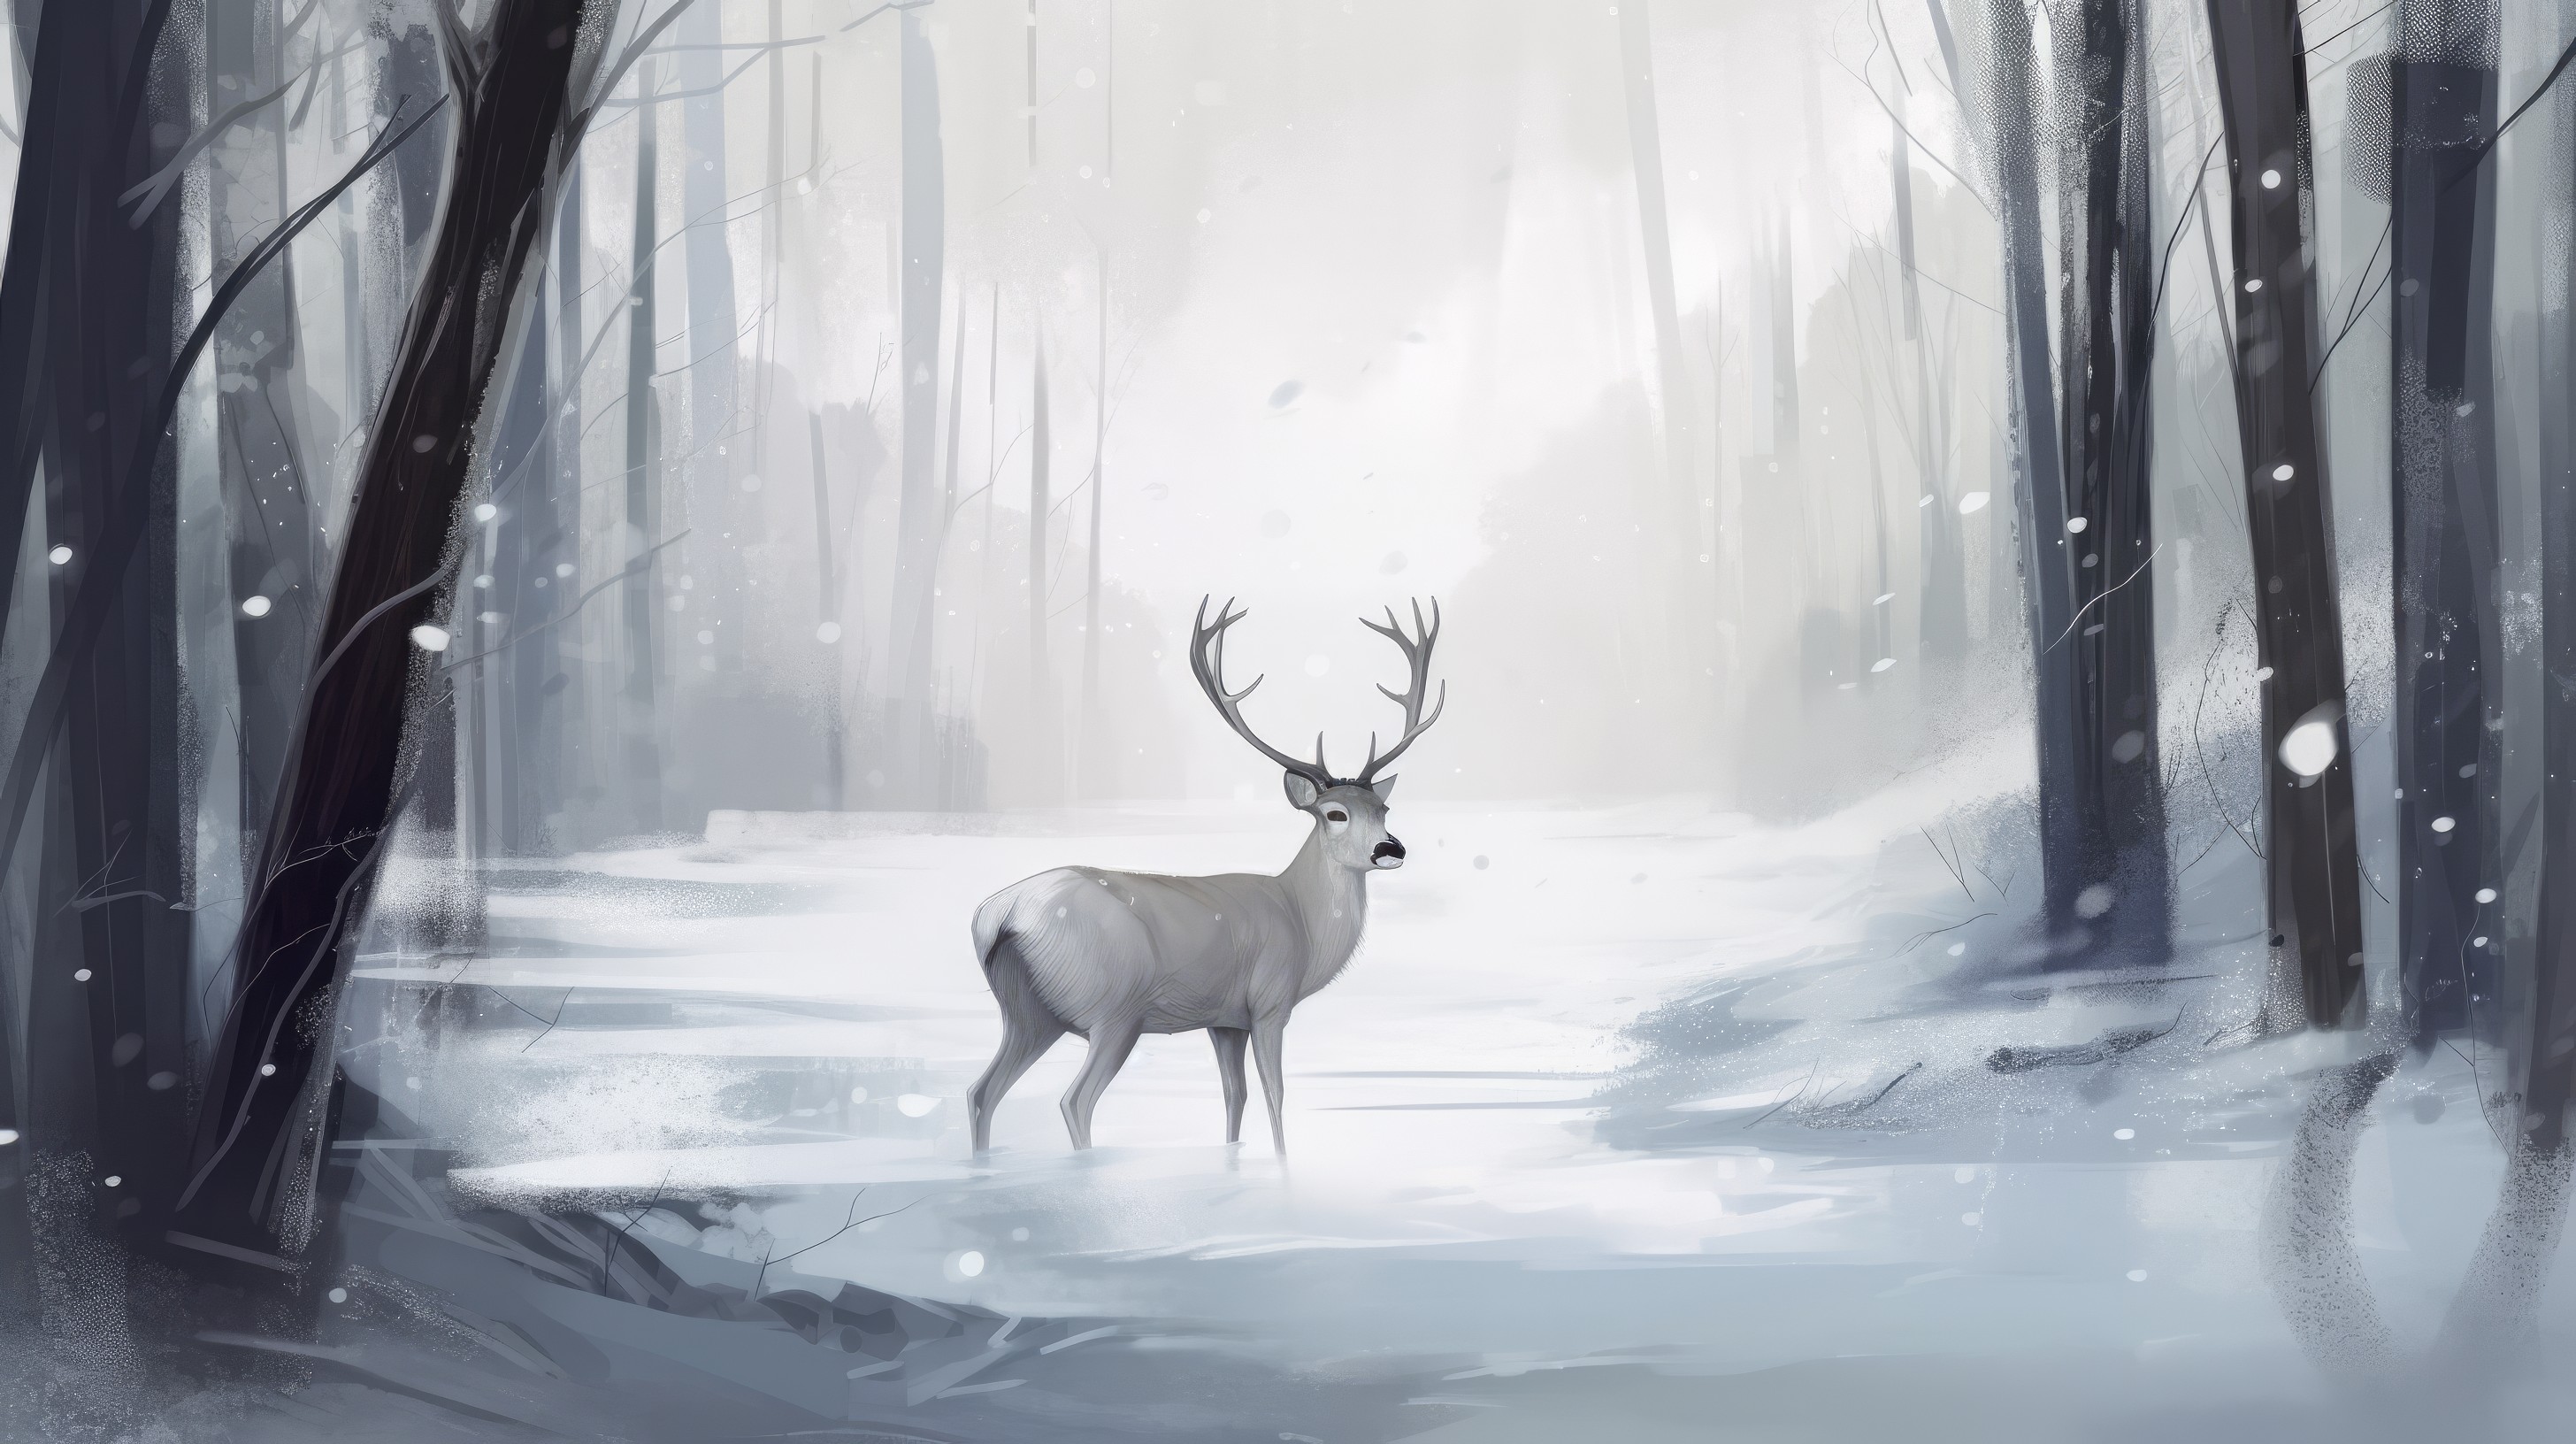 Illustration Deer Snow Winter Forest Animals Trees Antlers 2912x1632